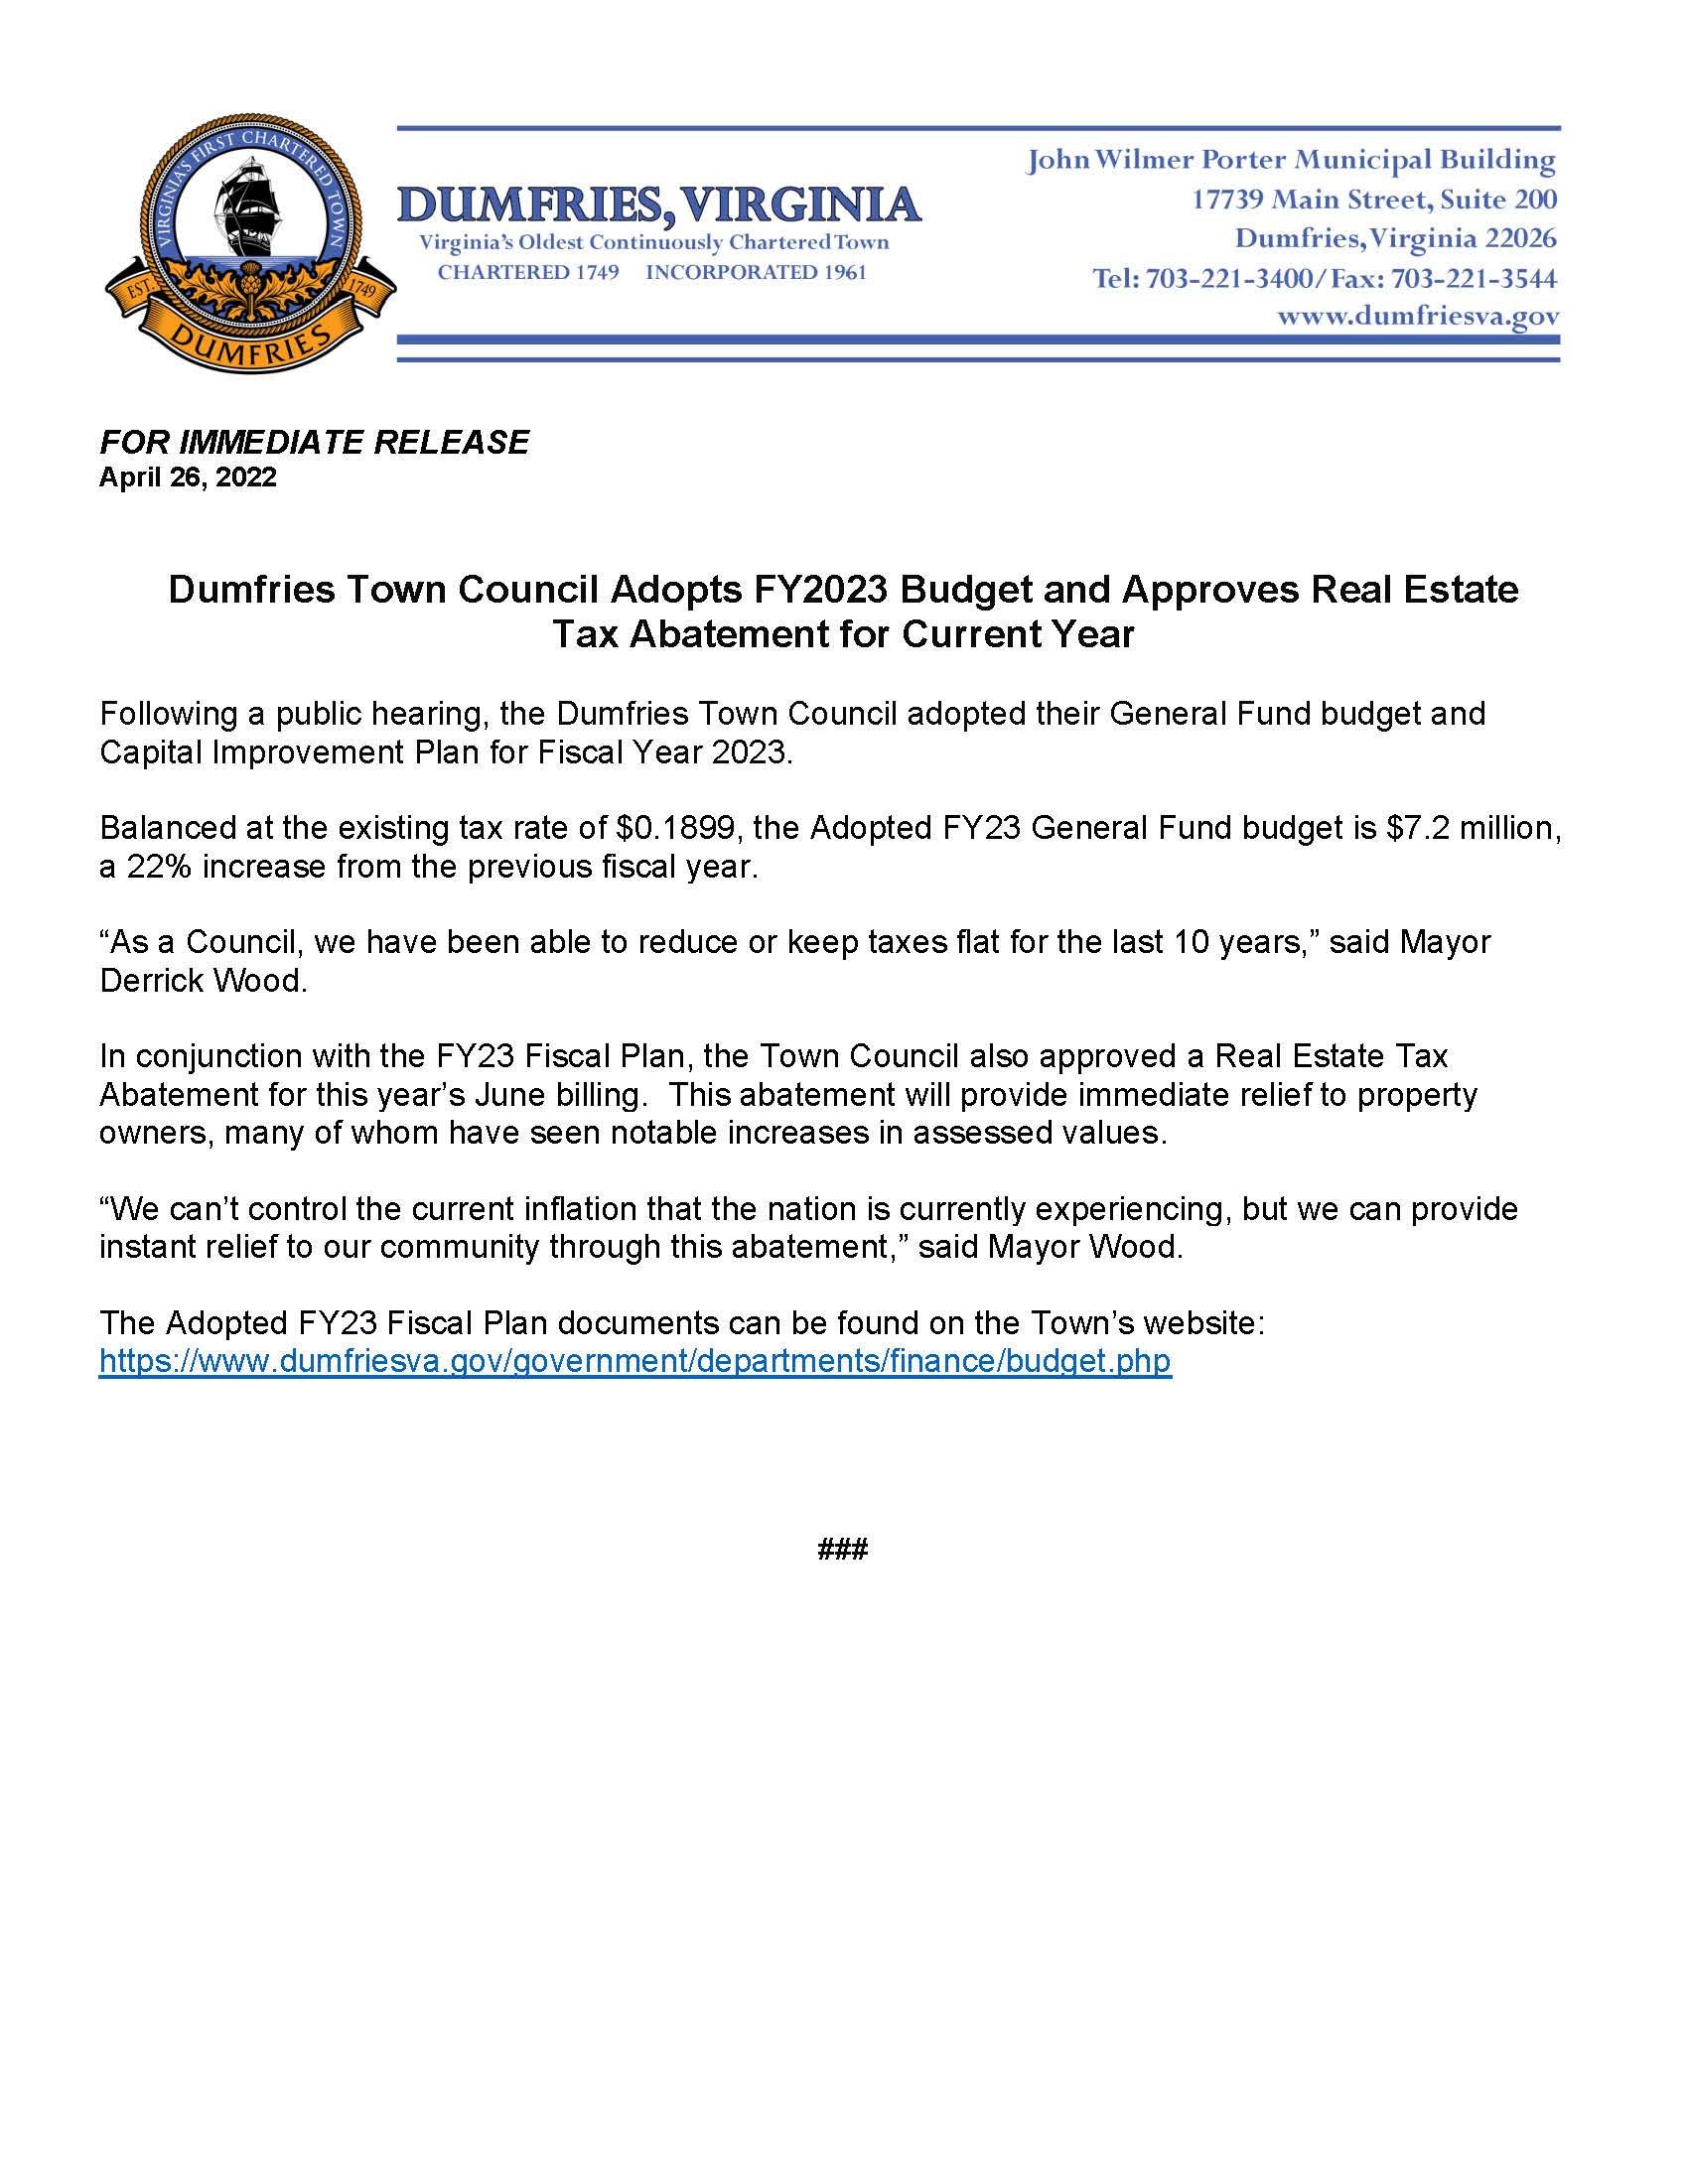 Dumfries Town Council Adopts FY23 Fiscal Plan Approves RE Tax Abatement